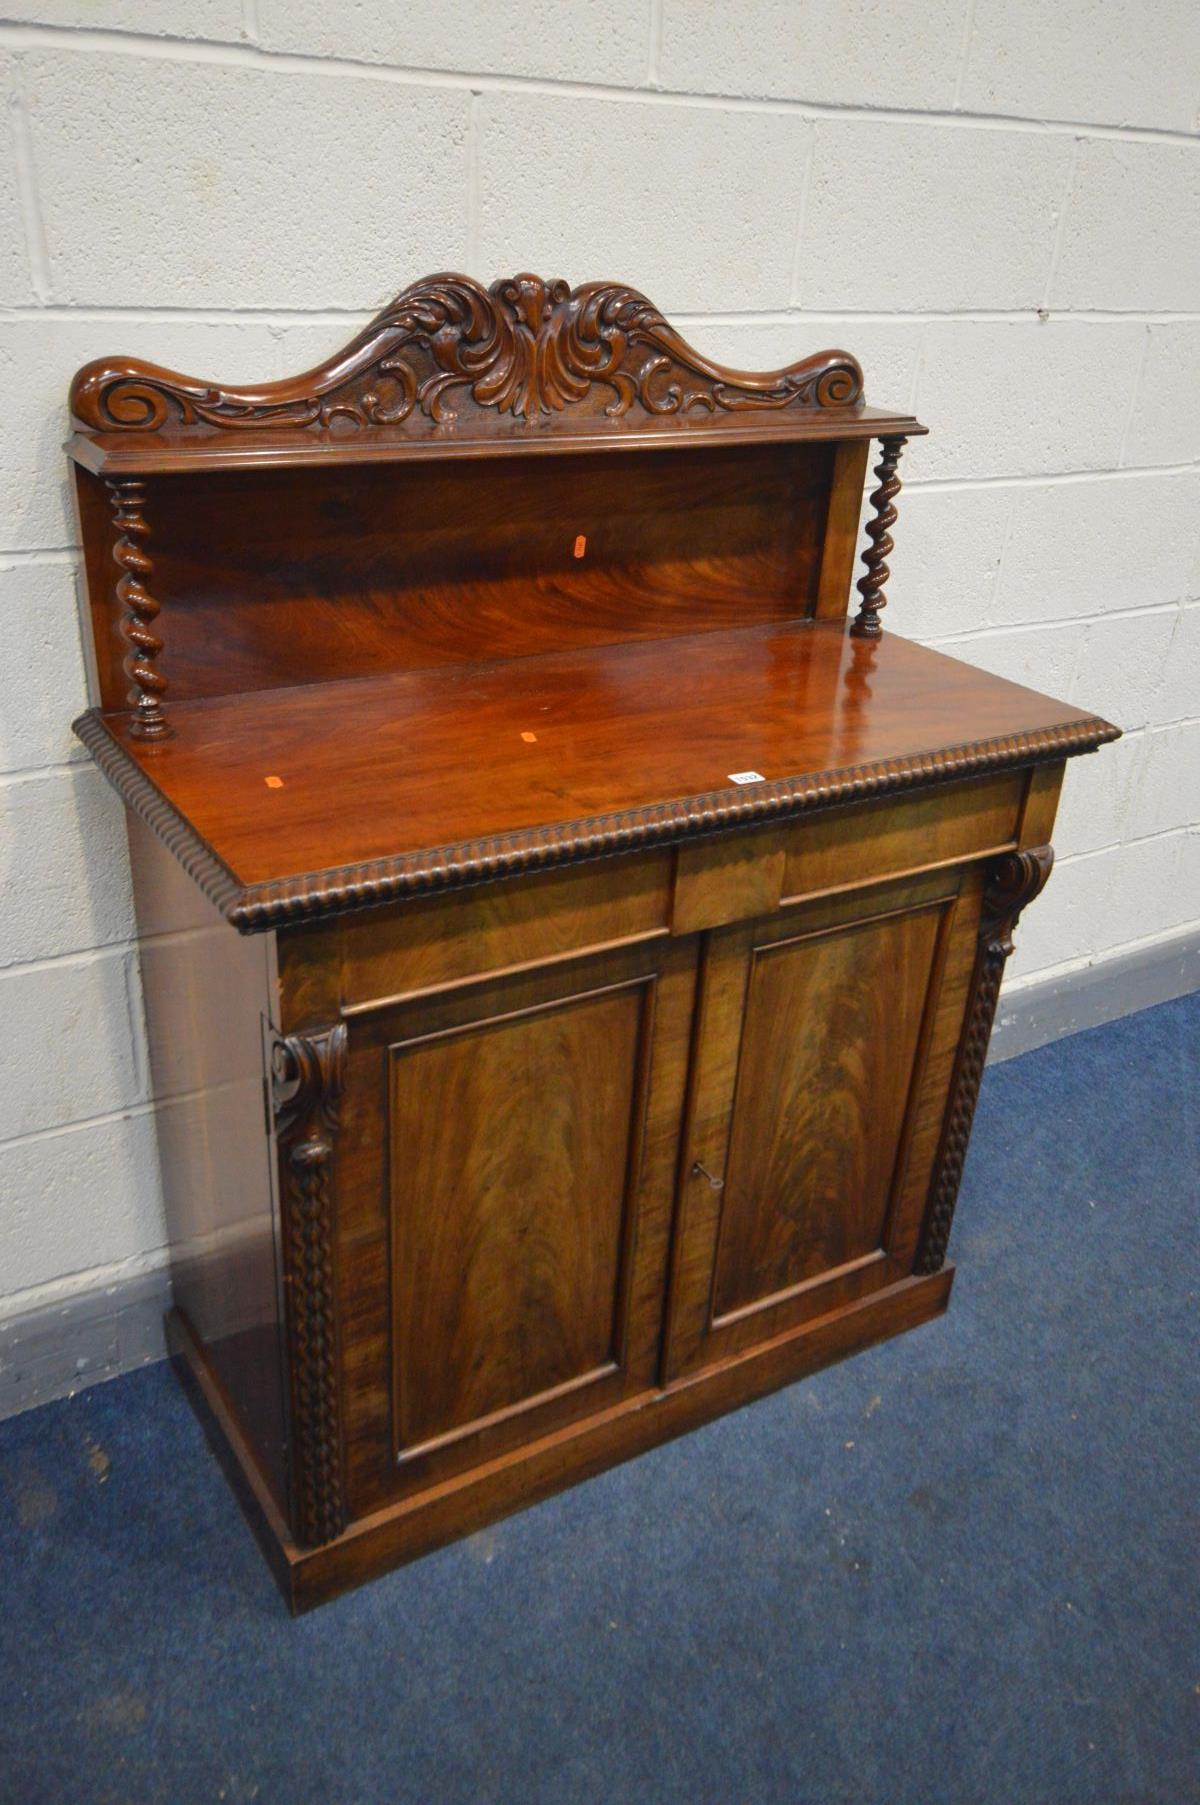 A VICTORIAN FLAME MAHOGANY CHIFFONIER, with a foliate carved raised back supported by barley twist